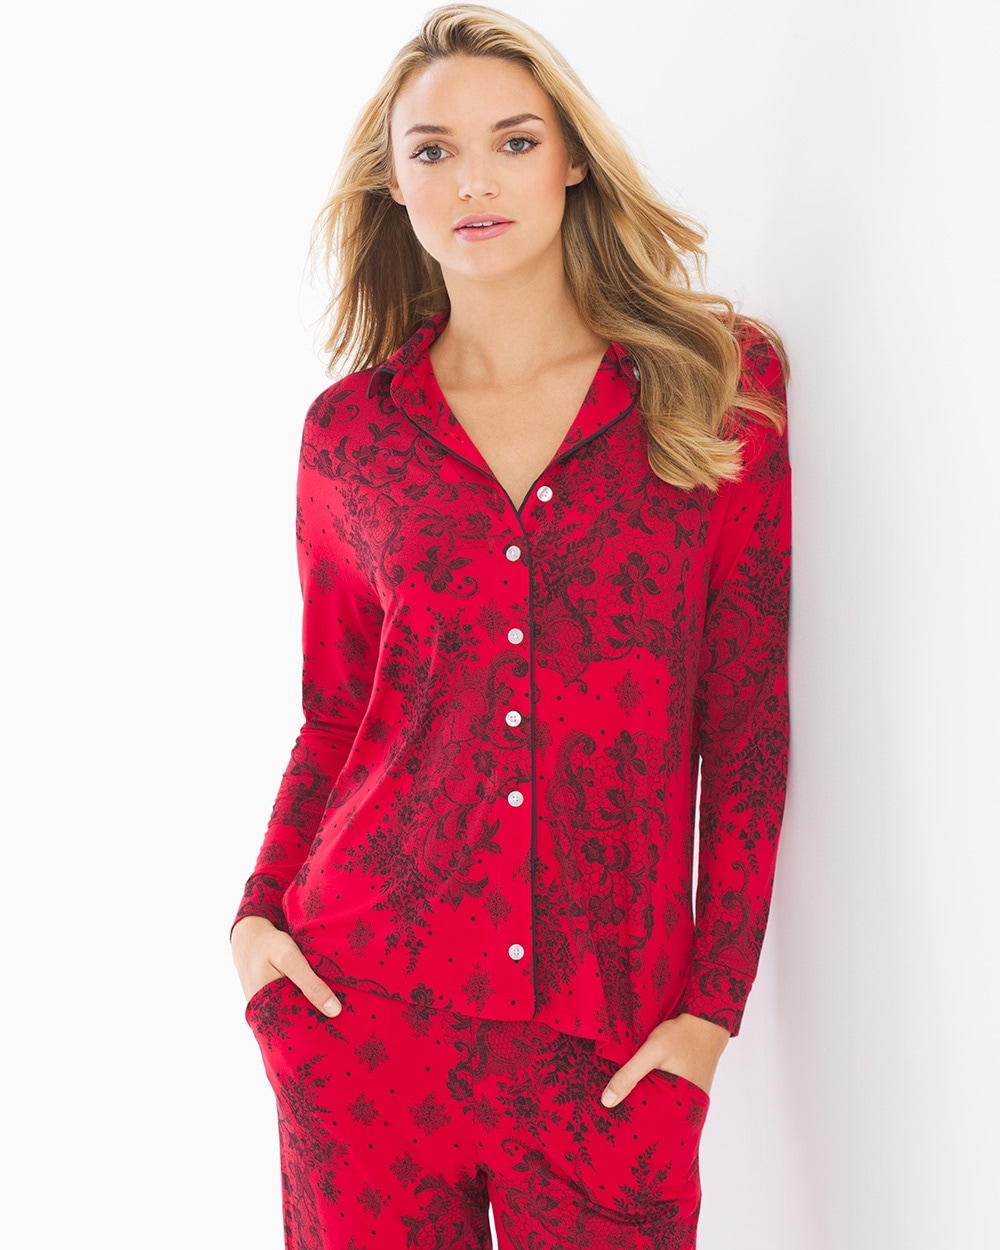 Cool Nights Long Sleeve Notch Collar Pajama Top Fine Lace Festive Red